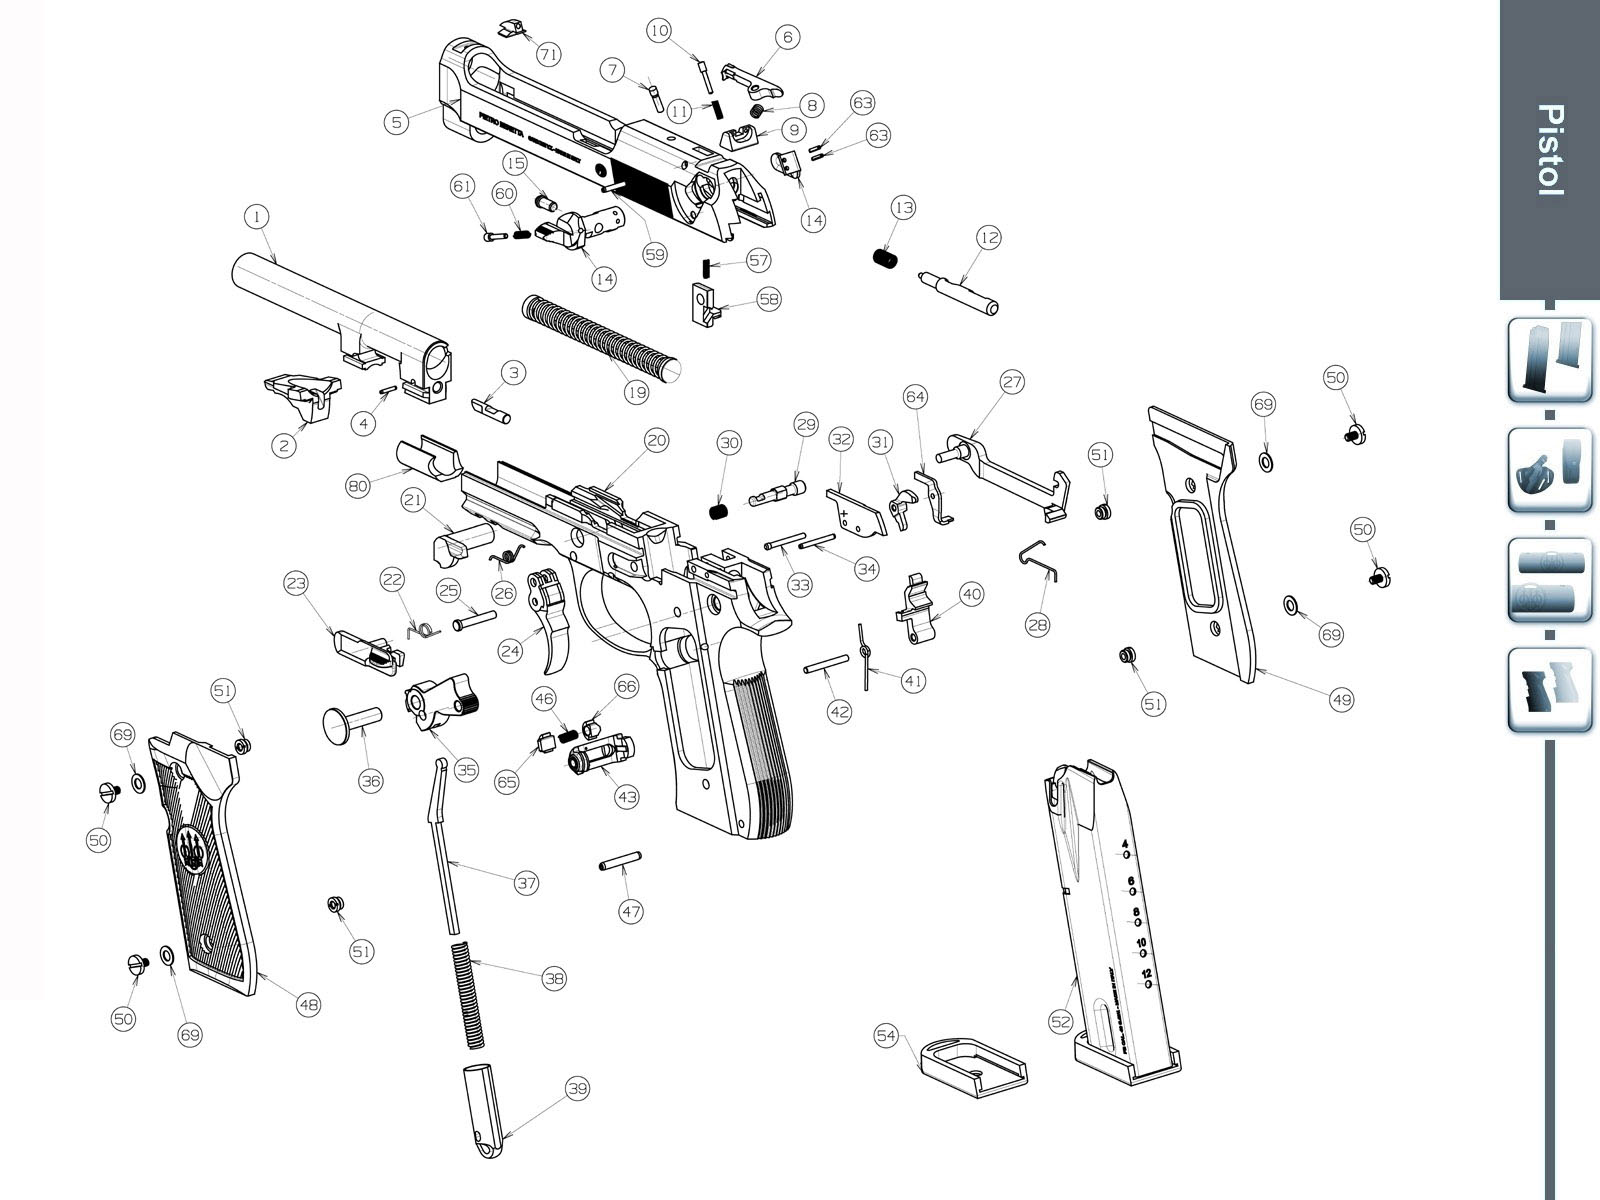 Beretta 92 Exploded View